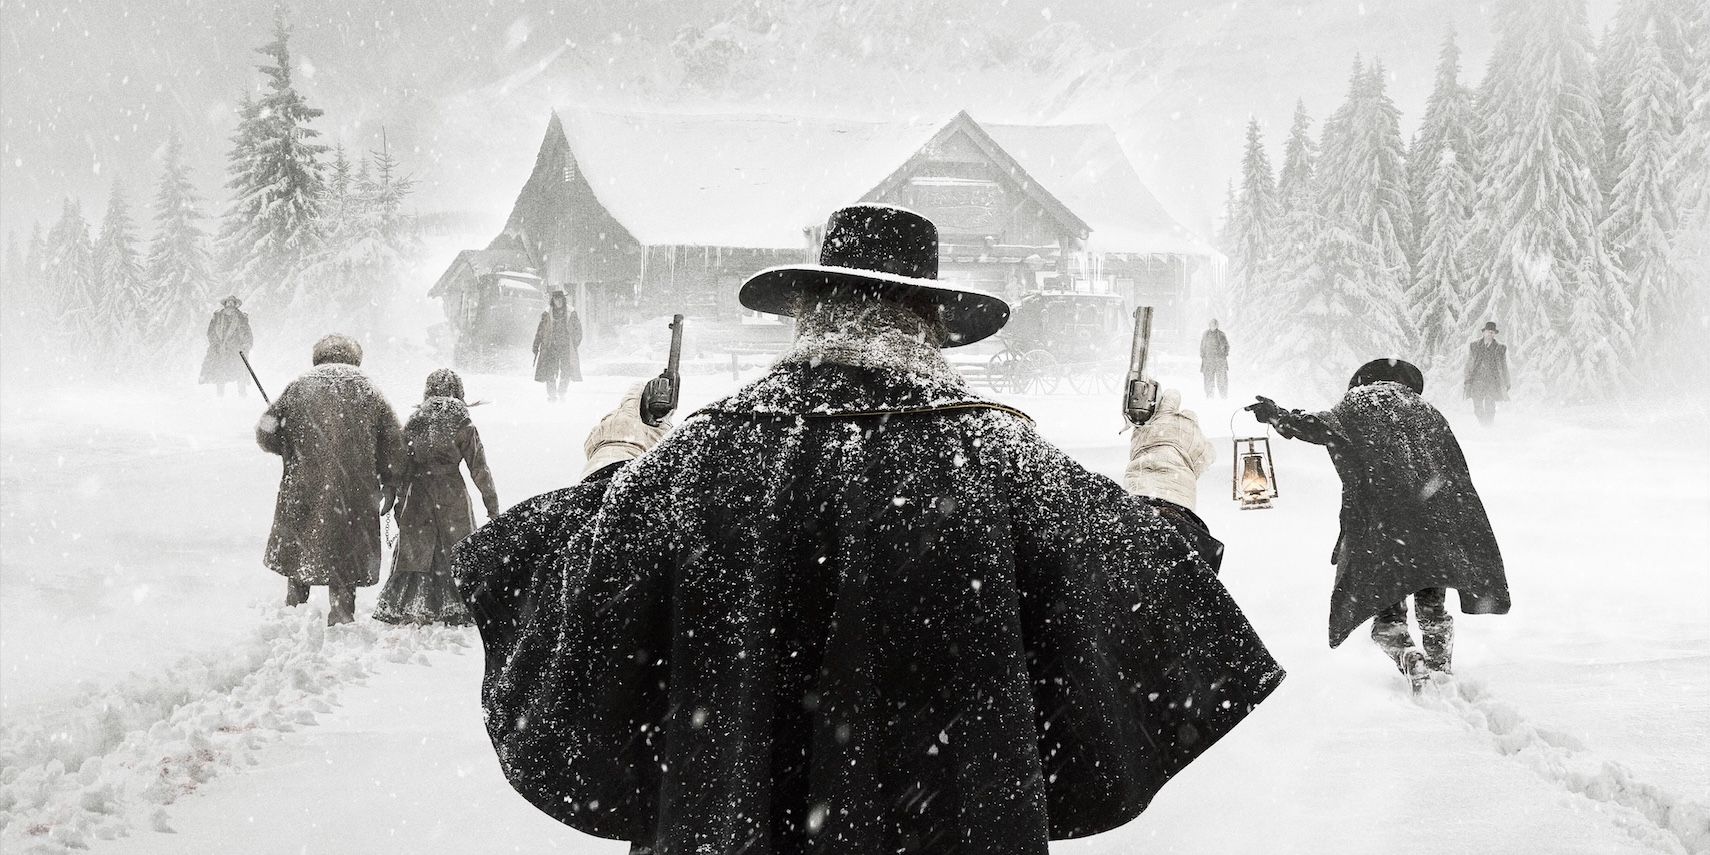 This Quentin Tarantino Film Shattered the Western Genre's Biggest Trope